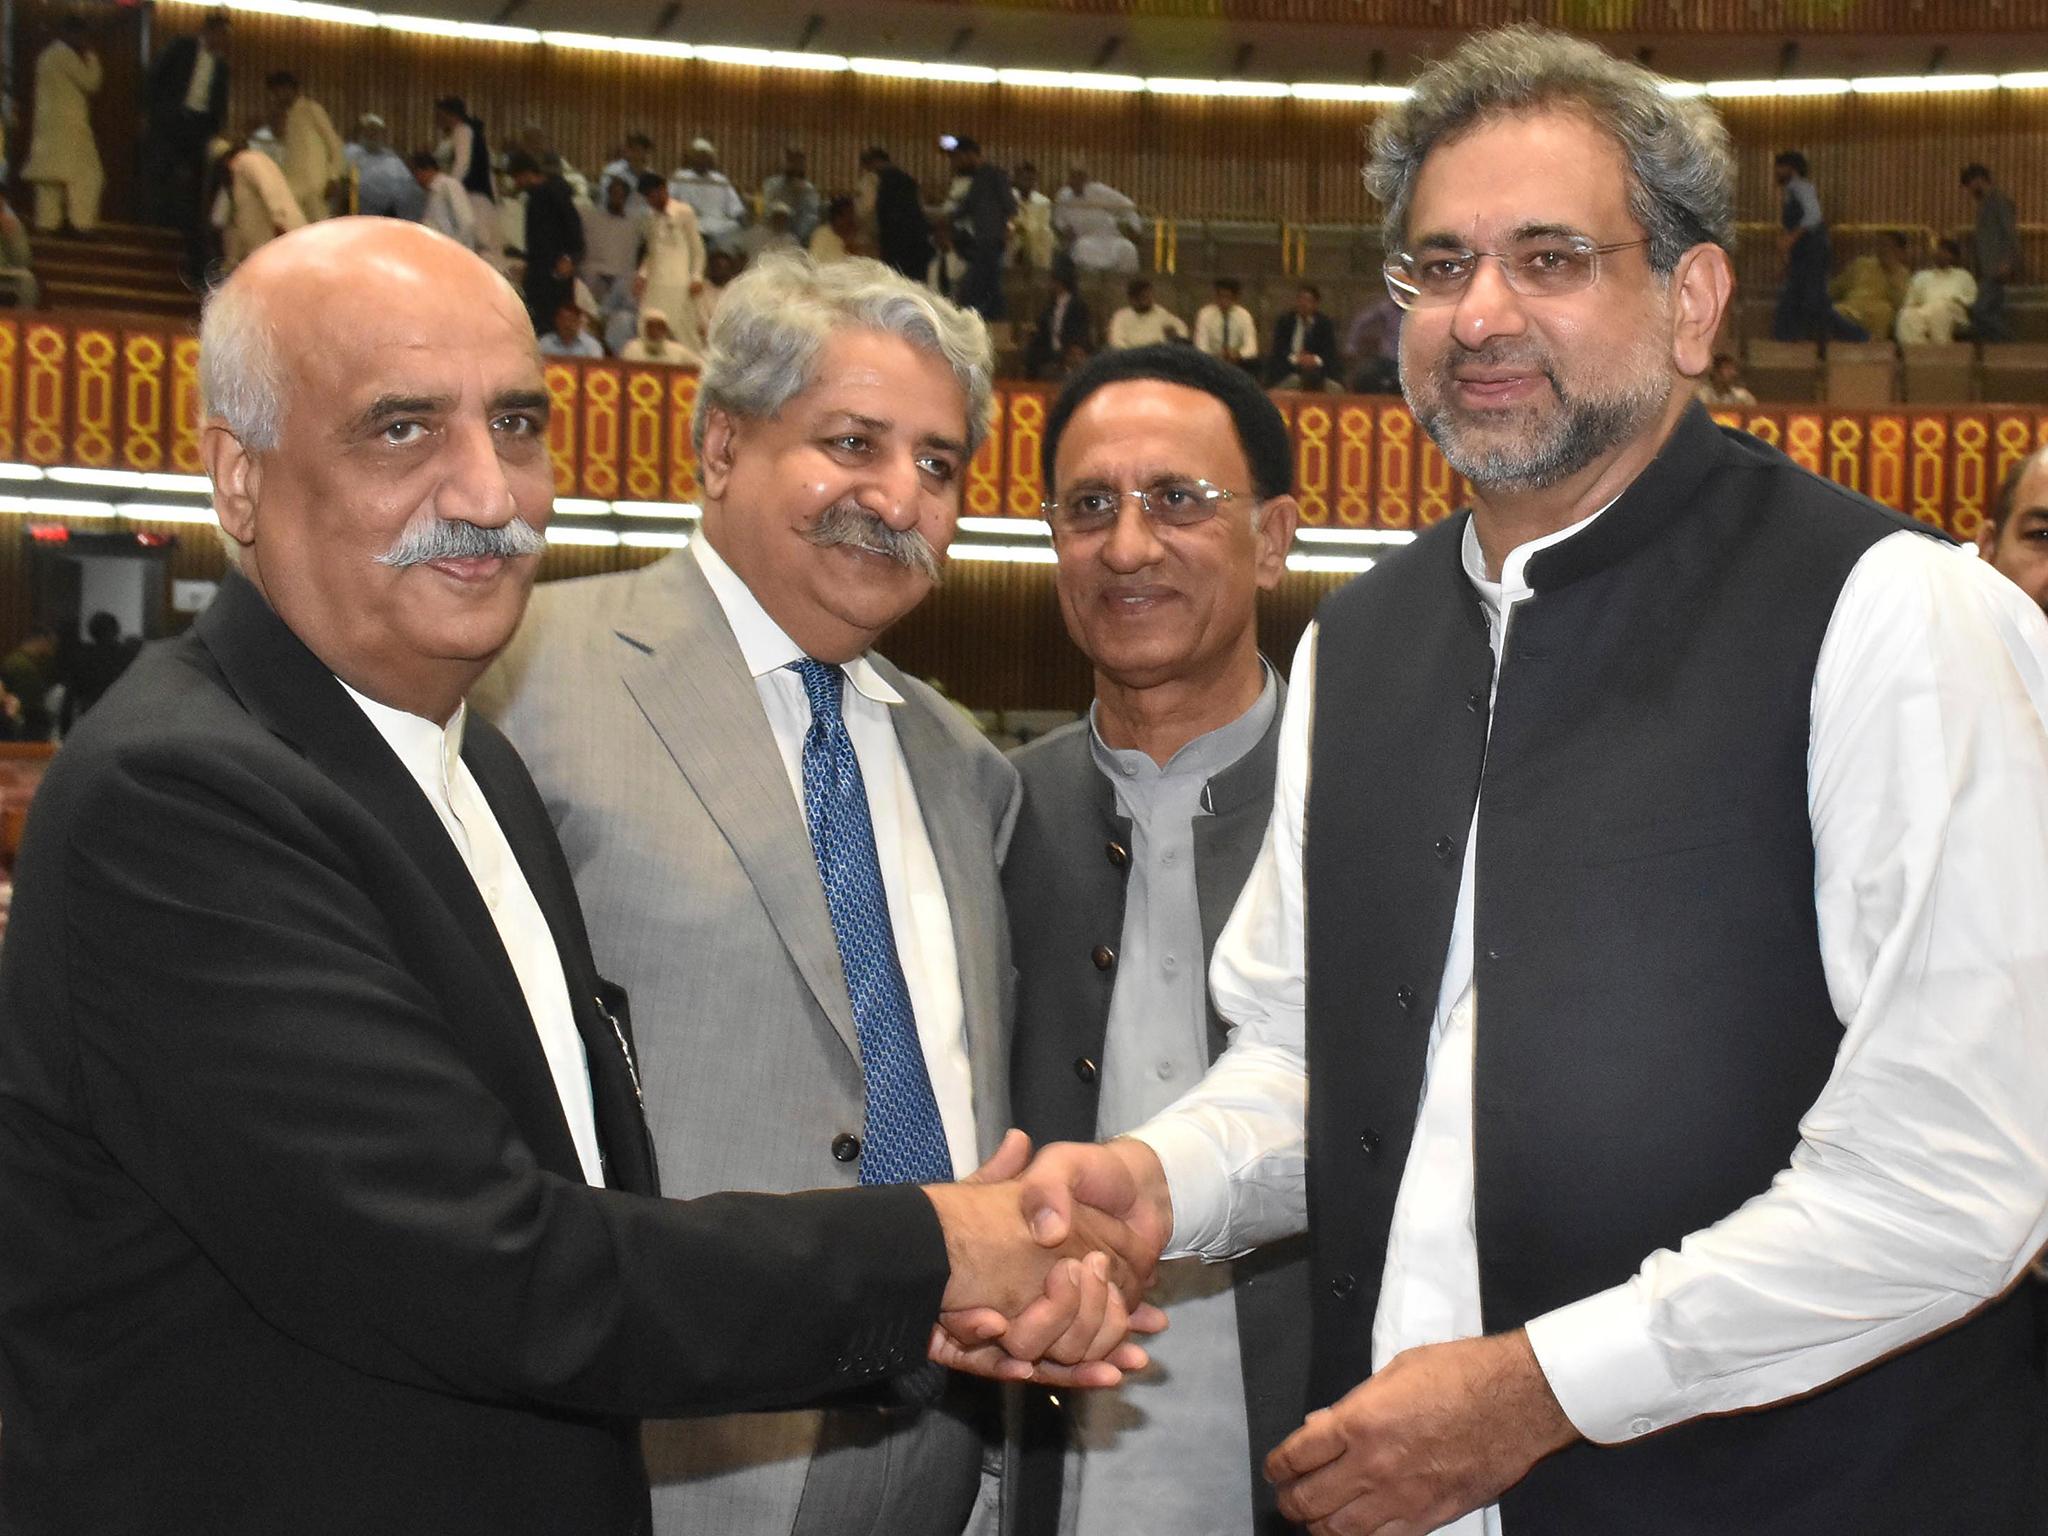 Shahid Khaqan Abbasi (R) was sworn into office this week after former leader Nawaz Sharif was ousted amid corruption claims